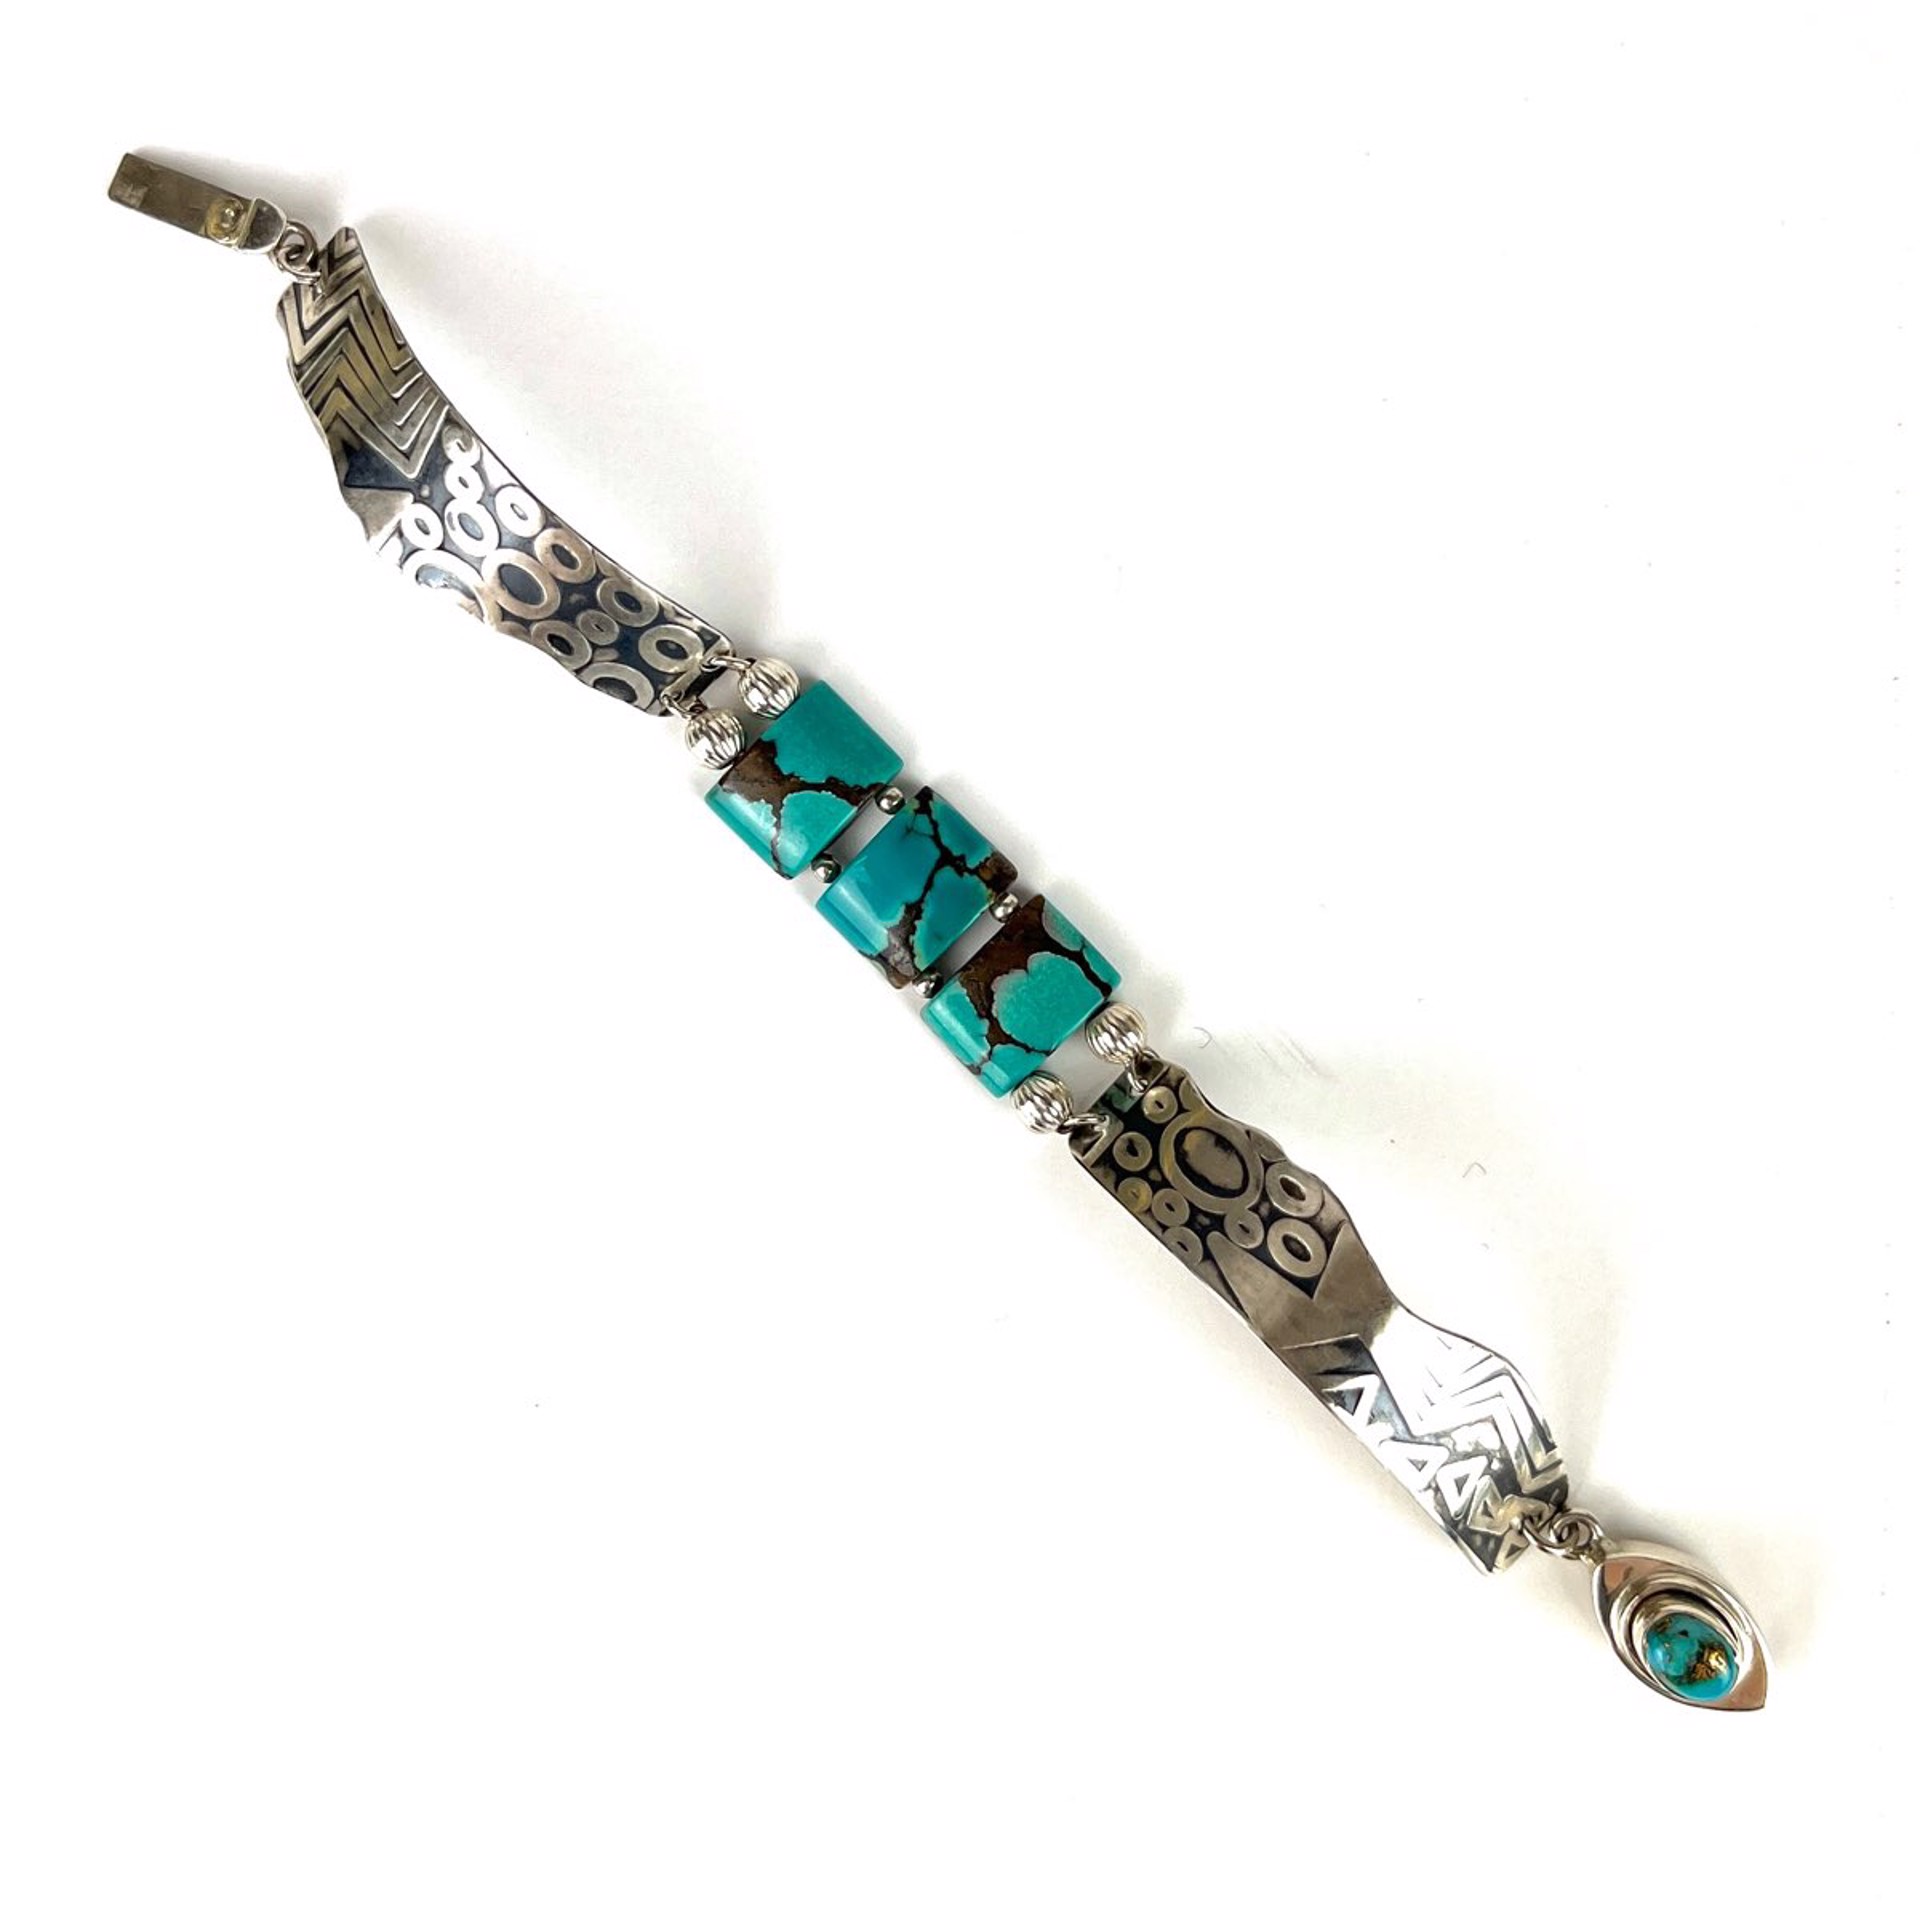 Oldstock Turquoise Tiles and Sterling Silver Bracelet by Nola Smodic